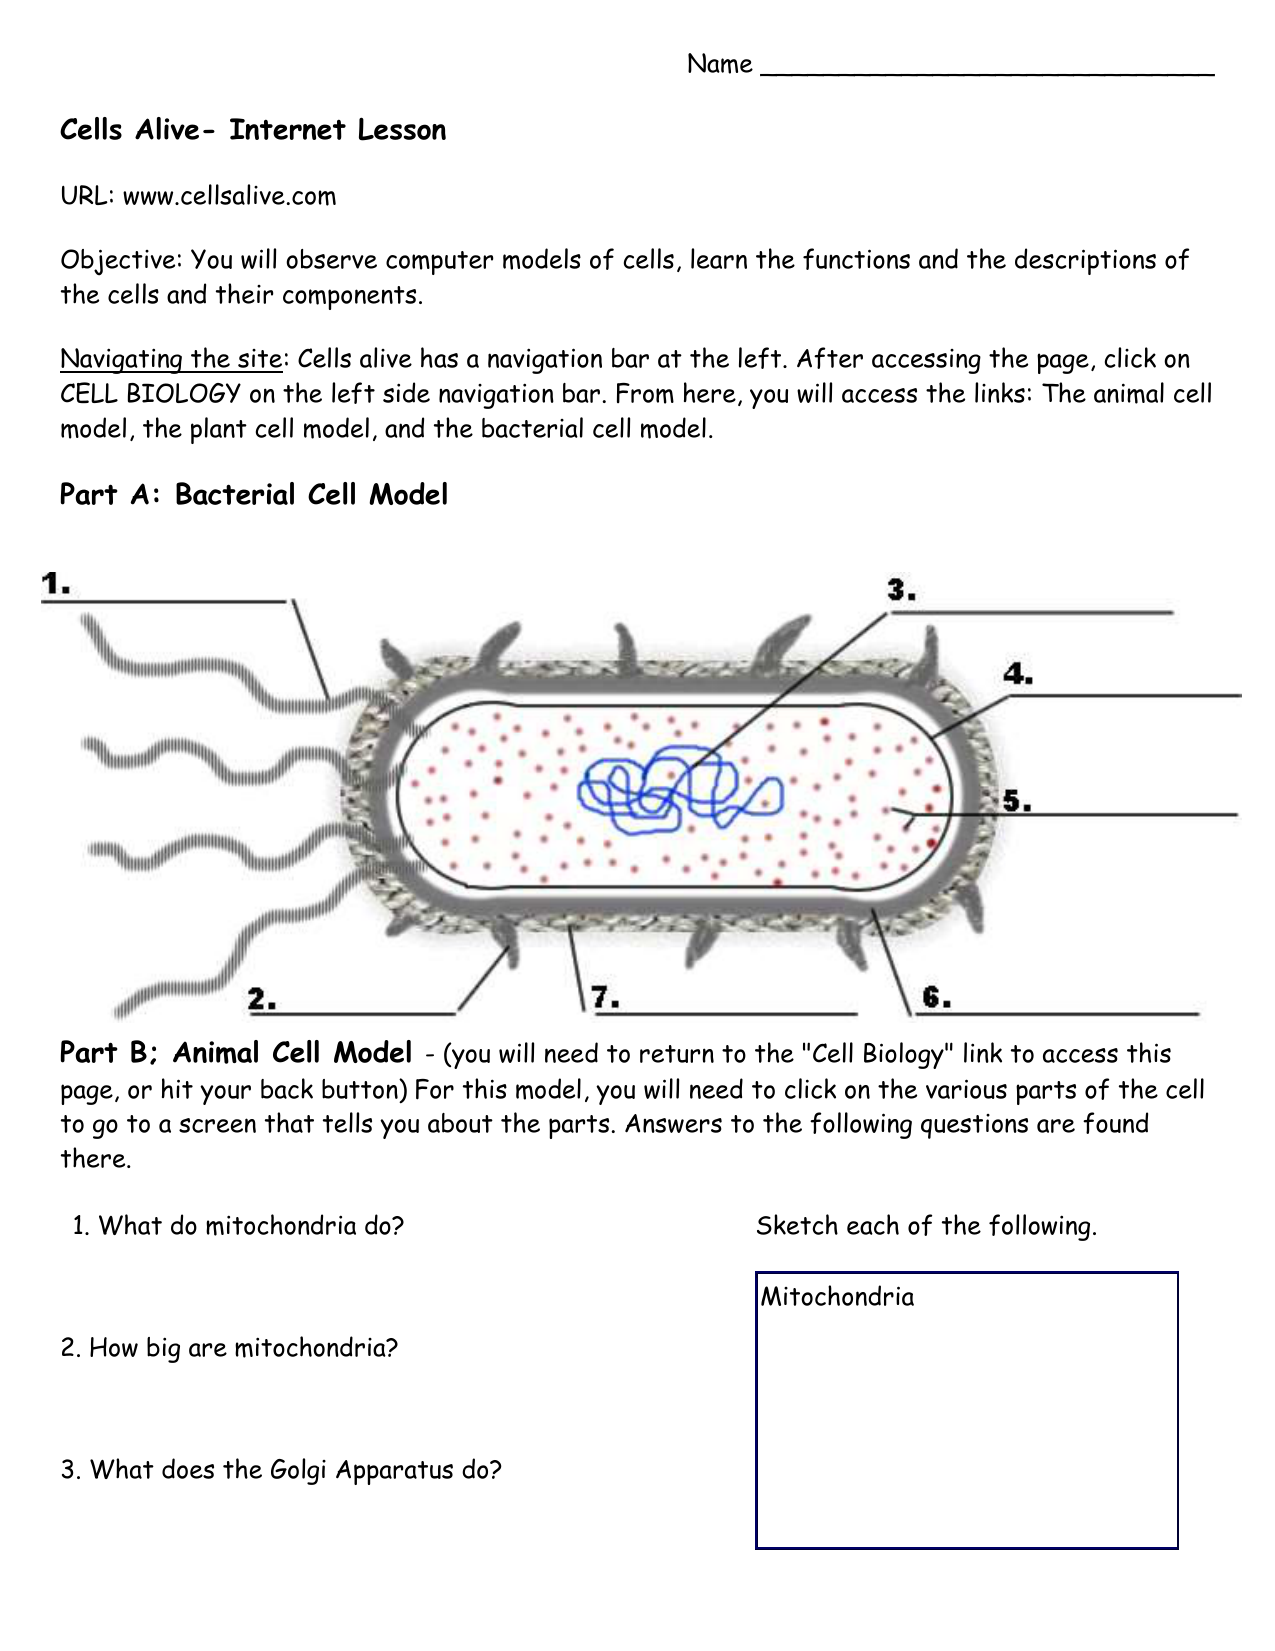 Cells Alive Bacterial Cell Worksheet Answer Key - Nidecmege With Cells Alive Worksheet Answer Key